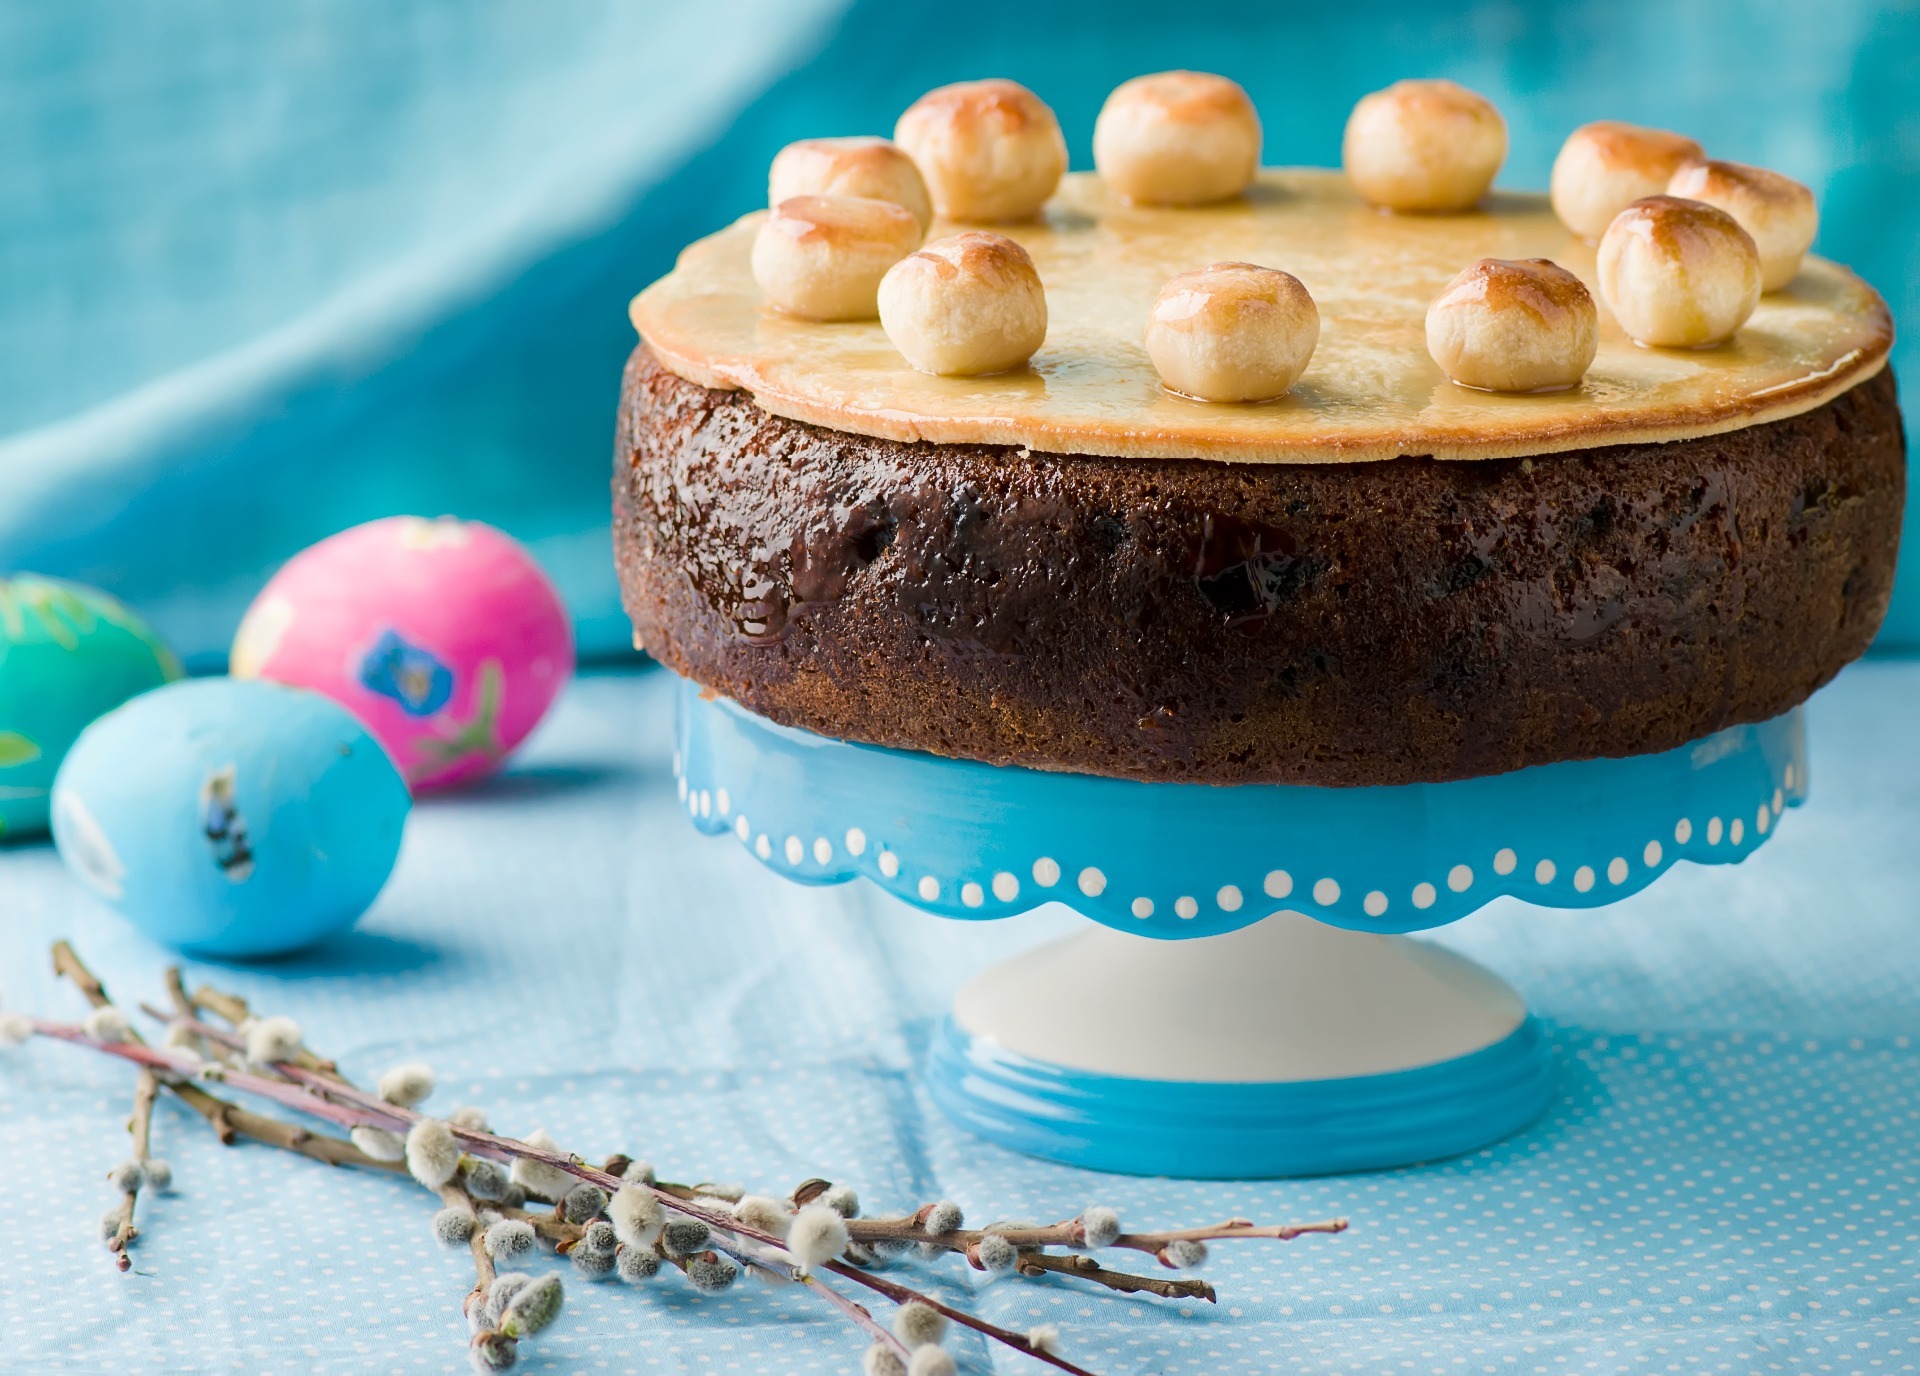 A traditional Simnel cake, on a blue and white cake stand, with a green, blue and pink faux egg and some flowers around the bottom of the stand.